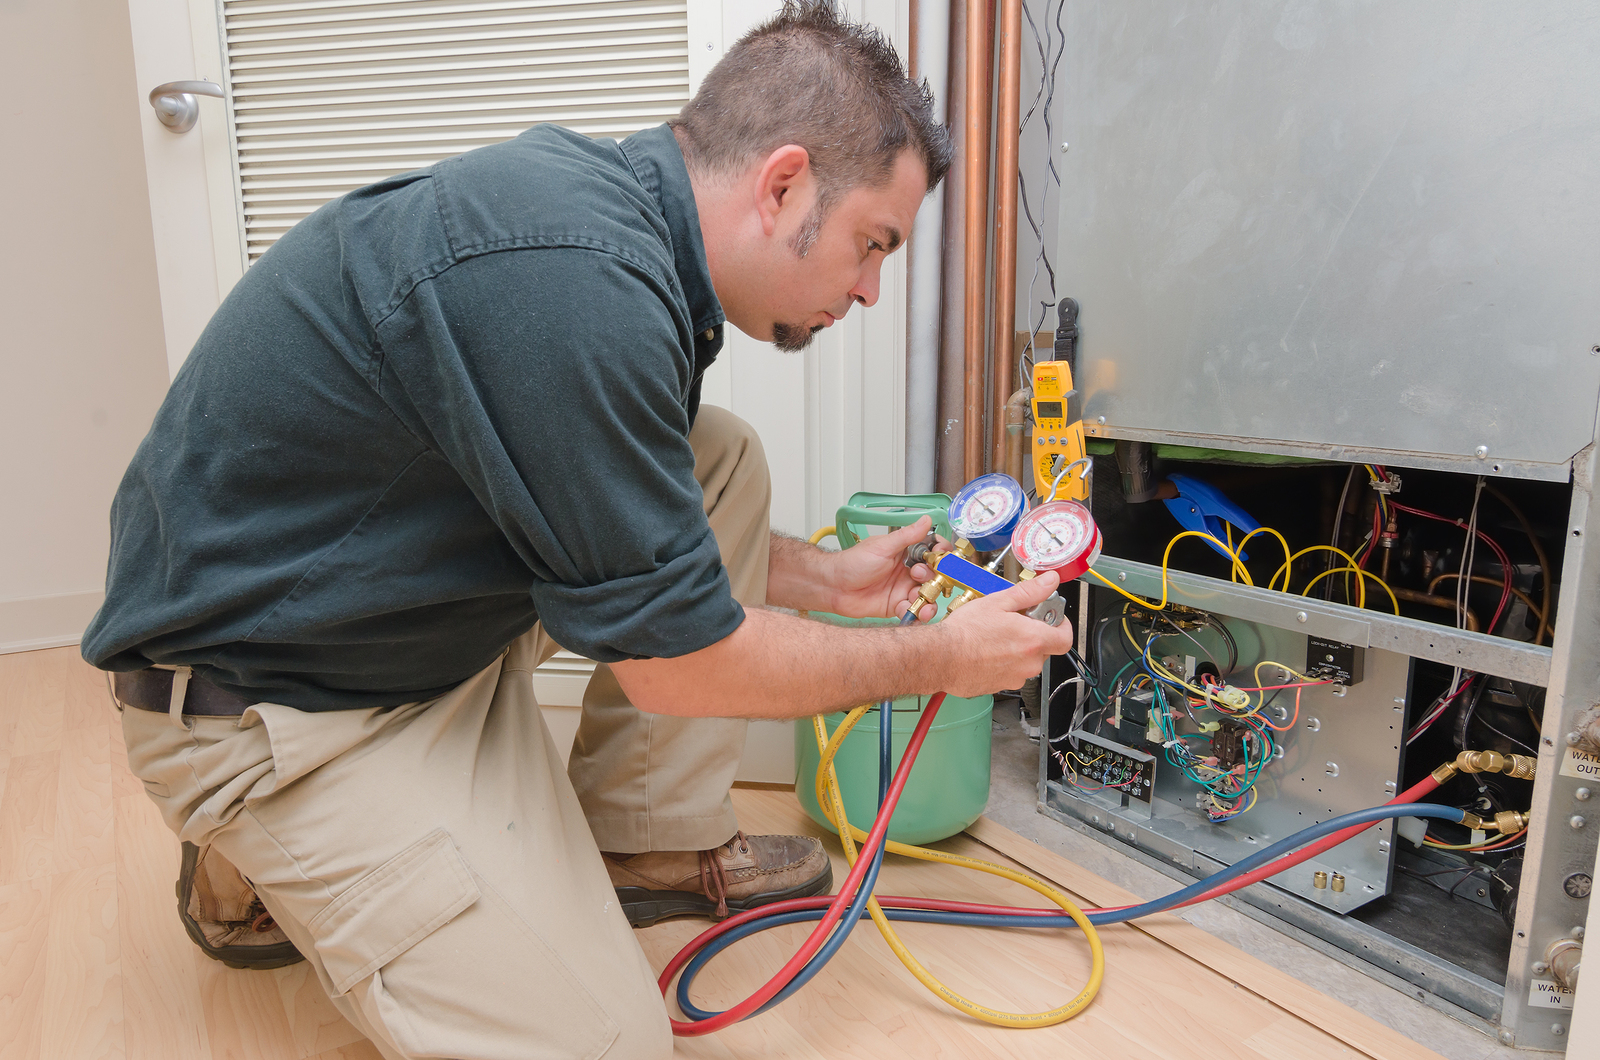 Maintenance Keeps Air Conditioners Energy Efficient